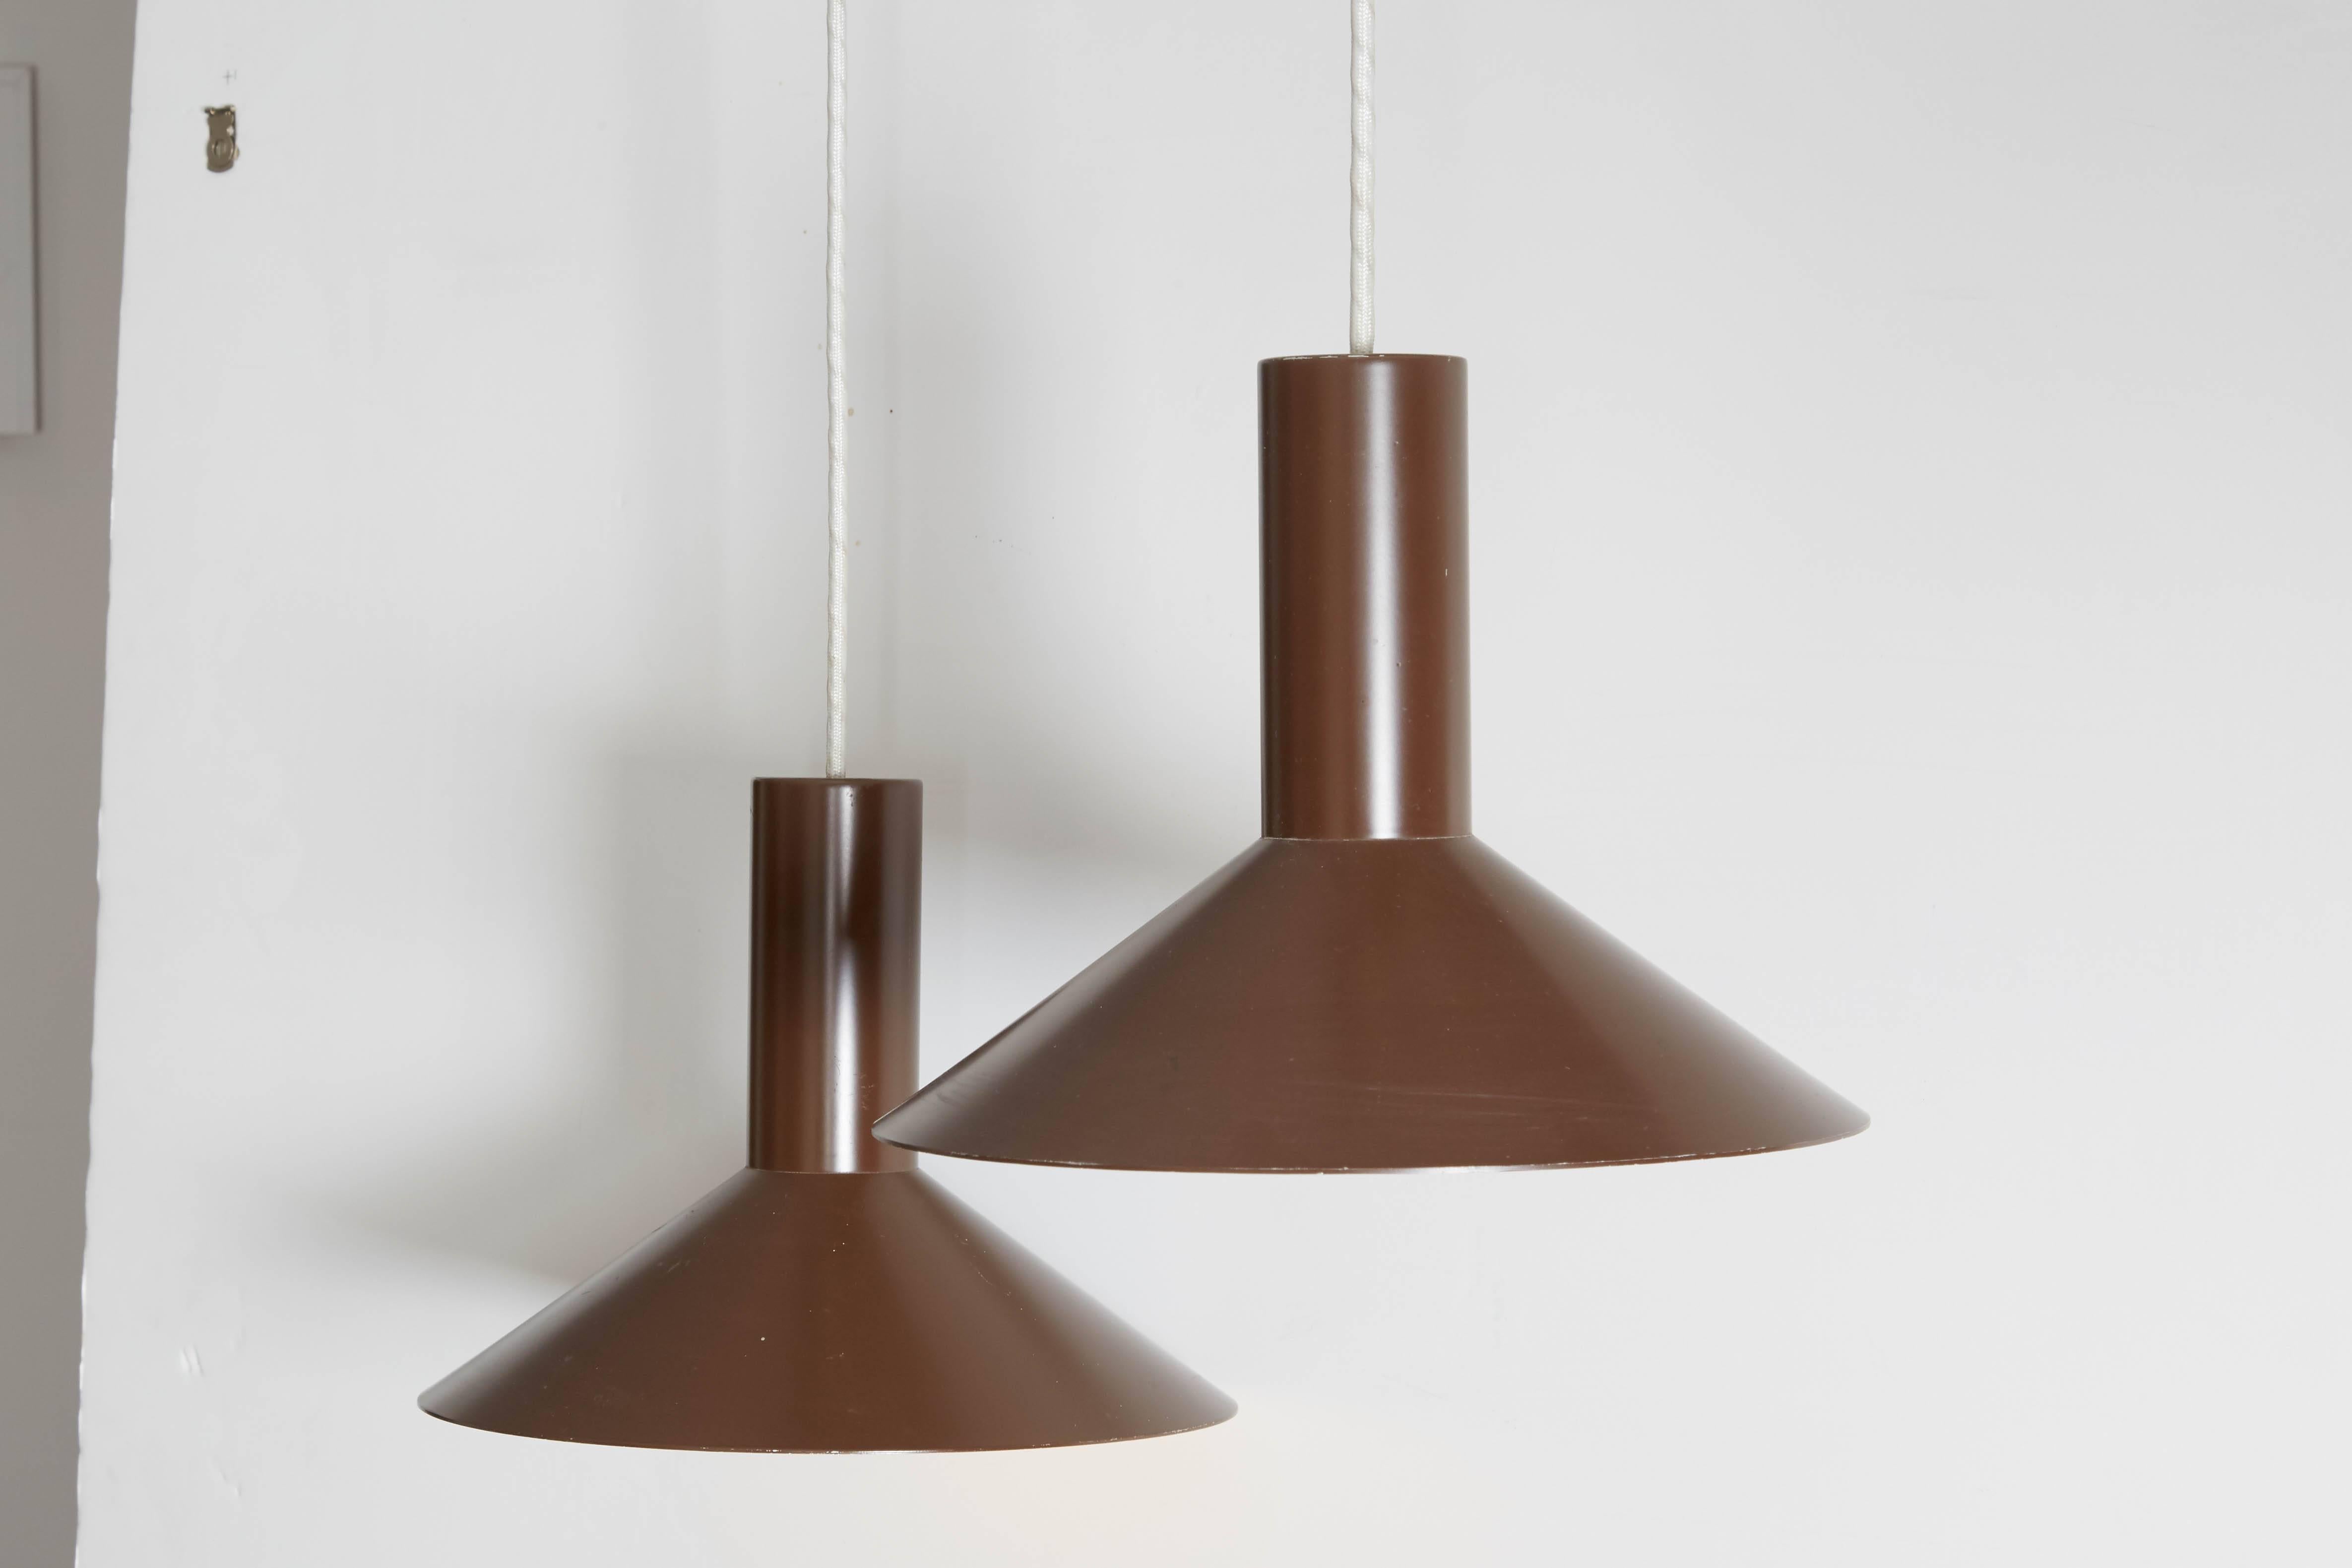 Vintage 1960s Brown Pendent Lamps, Pair

This pair of mid century pendents are in excellent condition. Great for the kitchen island, breakfast nook, dining room, or hallway. Ready for pick up, delivery, or shipping anywhere in the world.